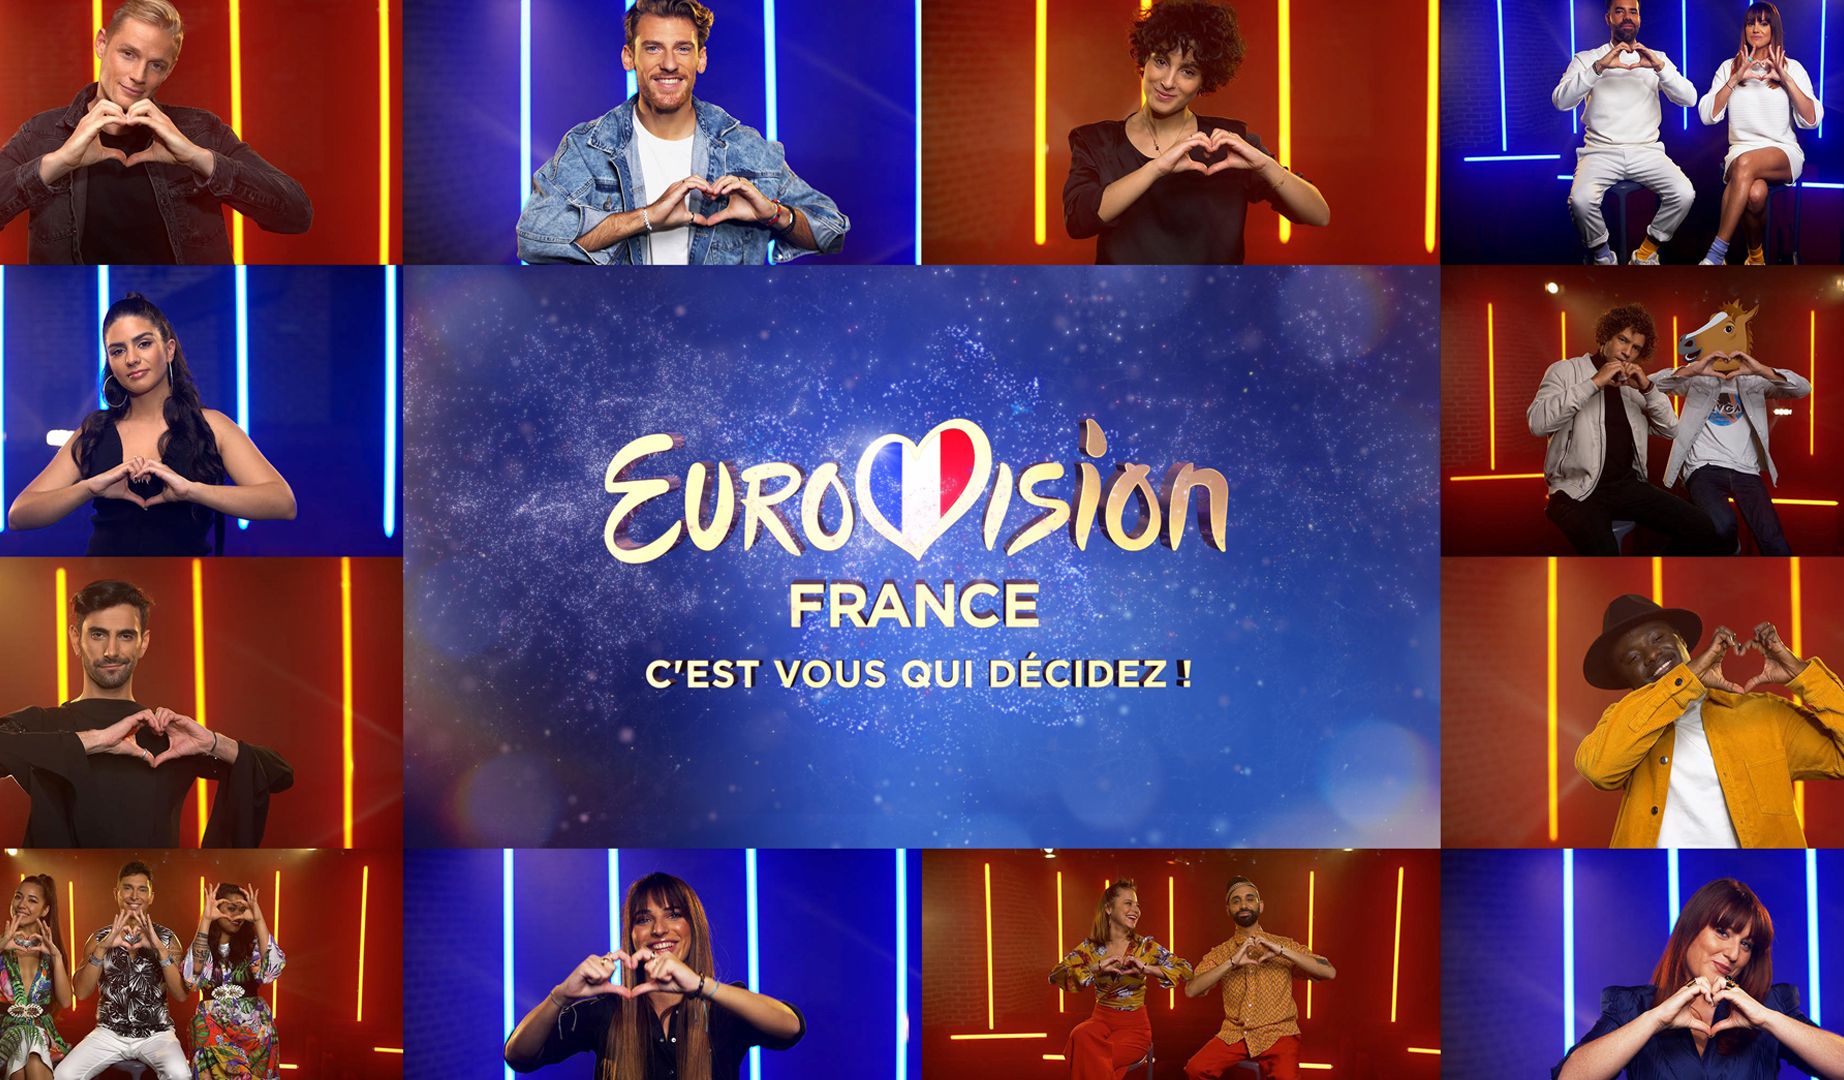 Listen to the songs vying to represent France in Eurovision 2021!